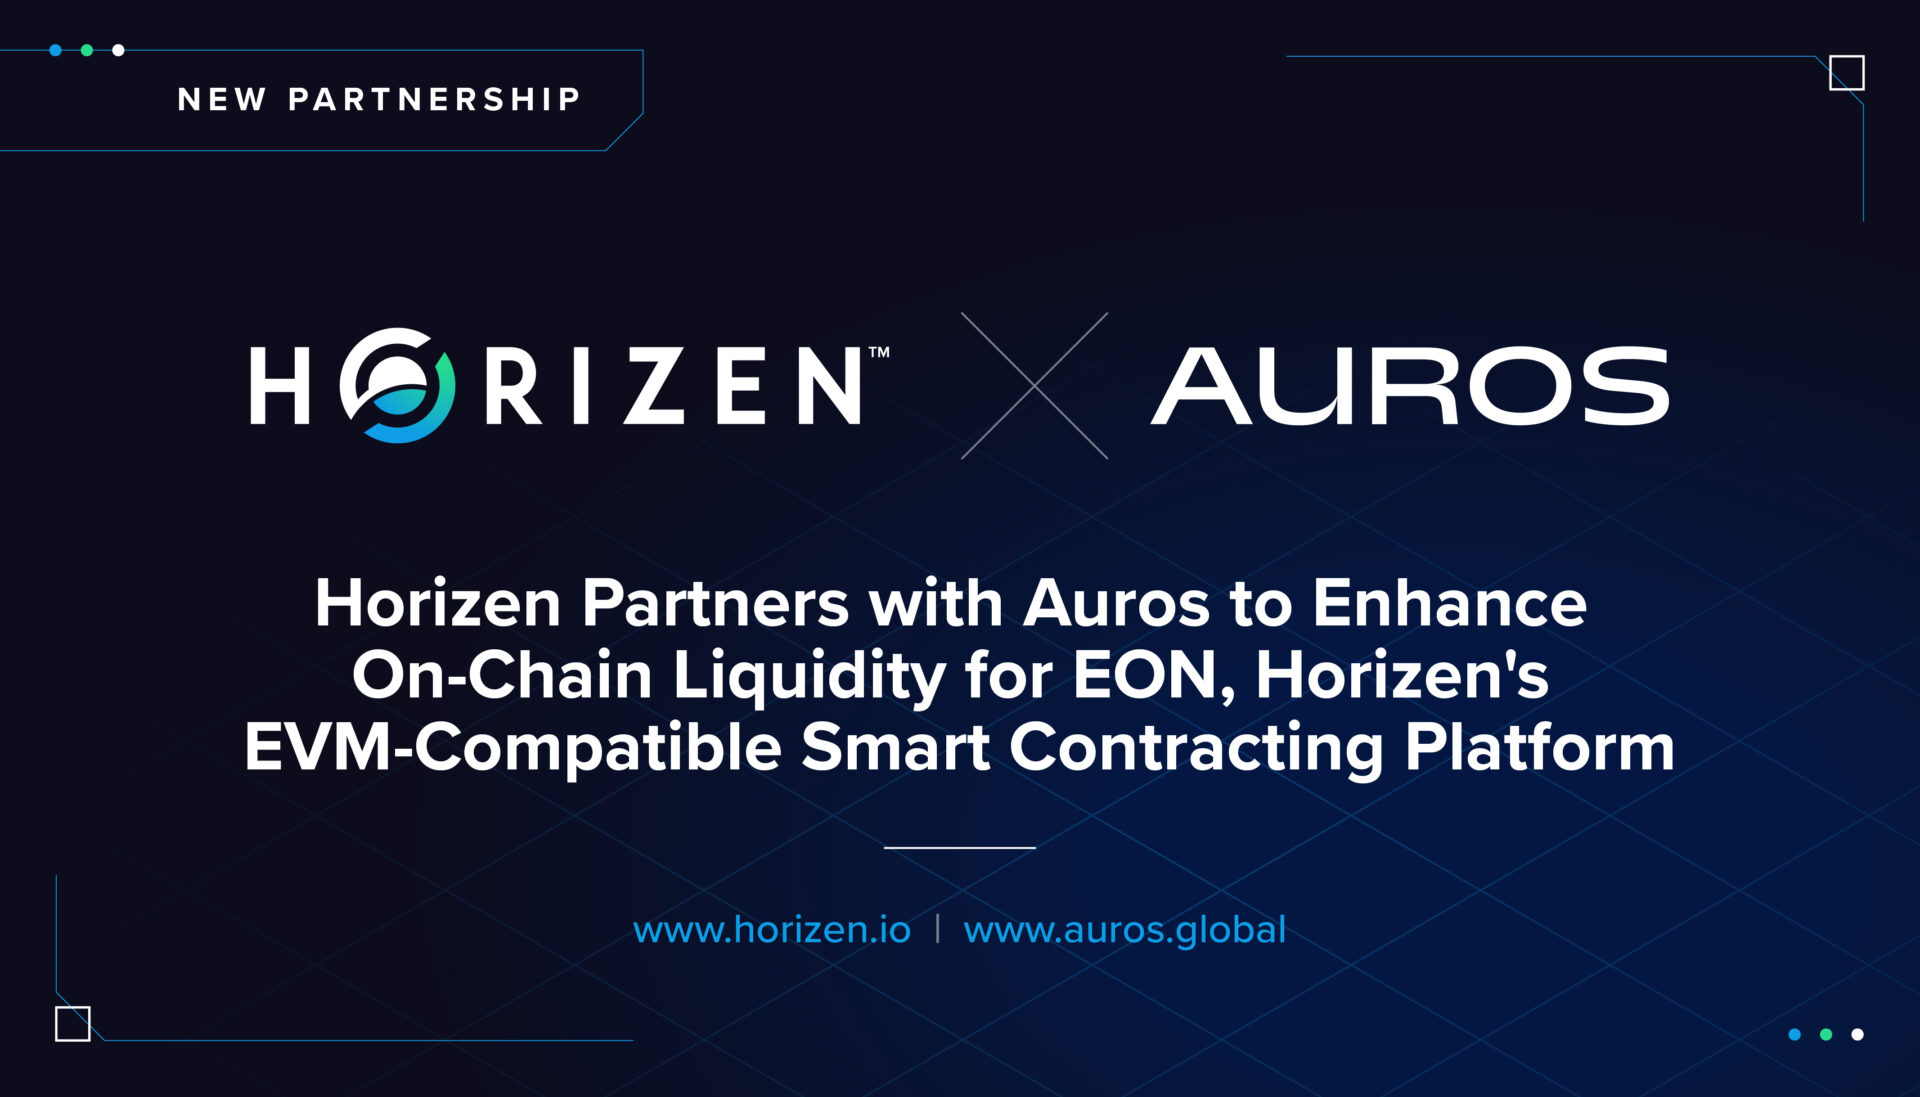 Horizen partners with Auros